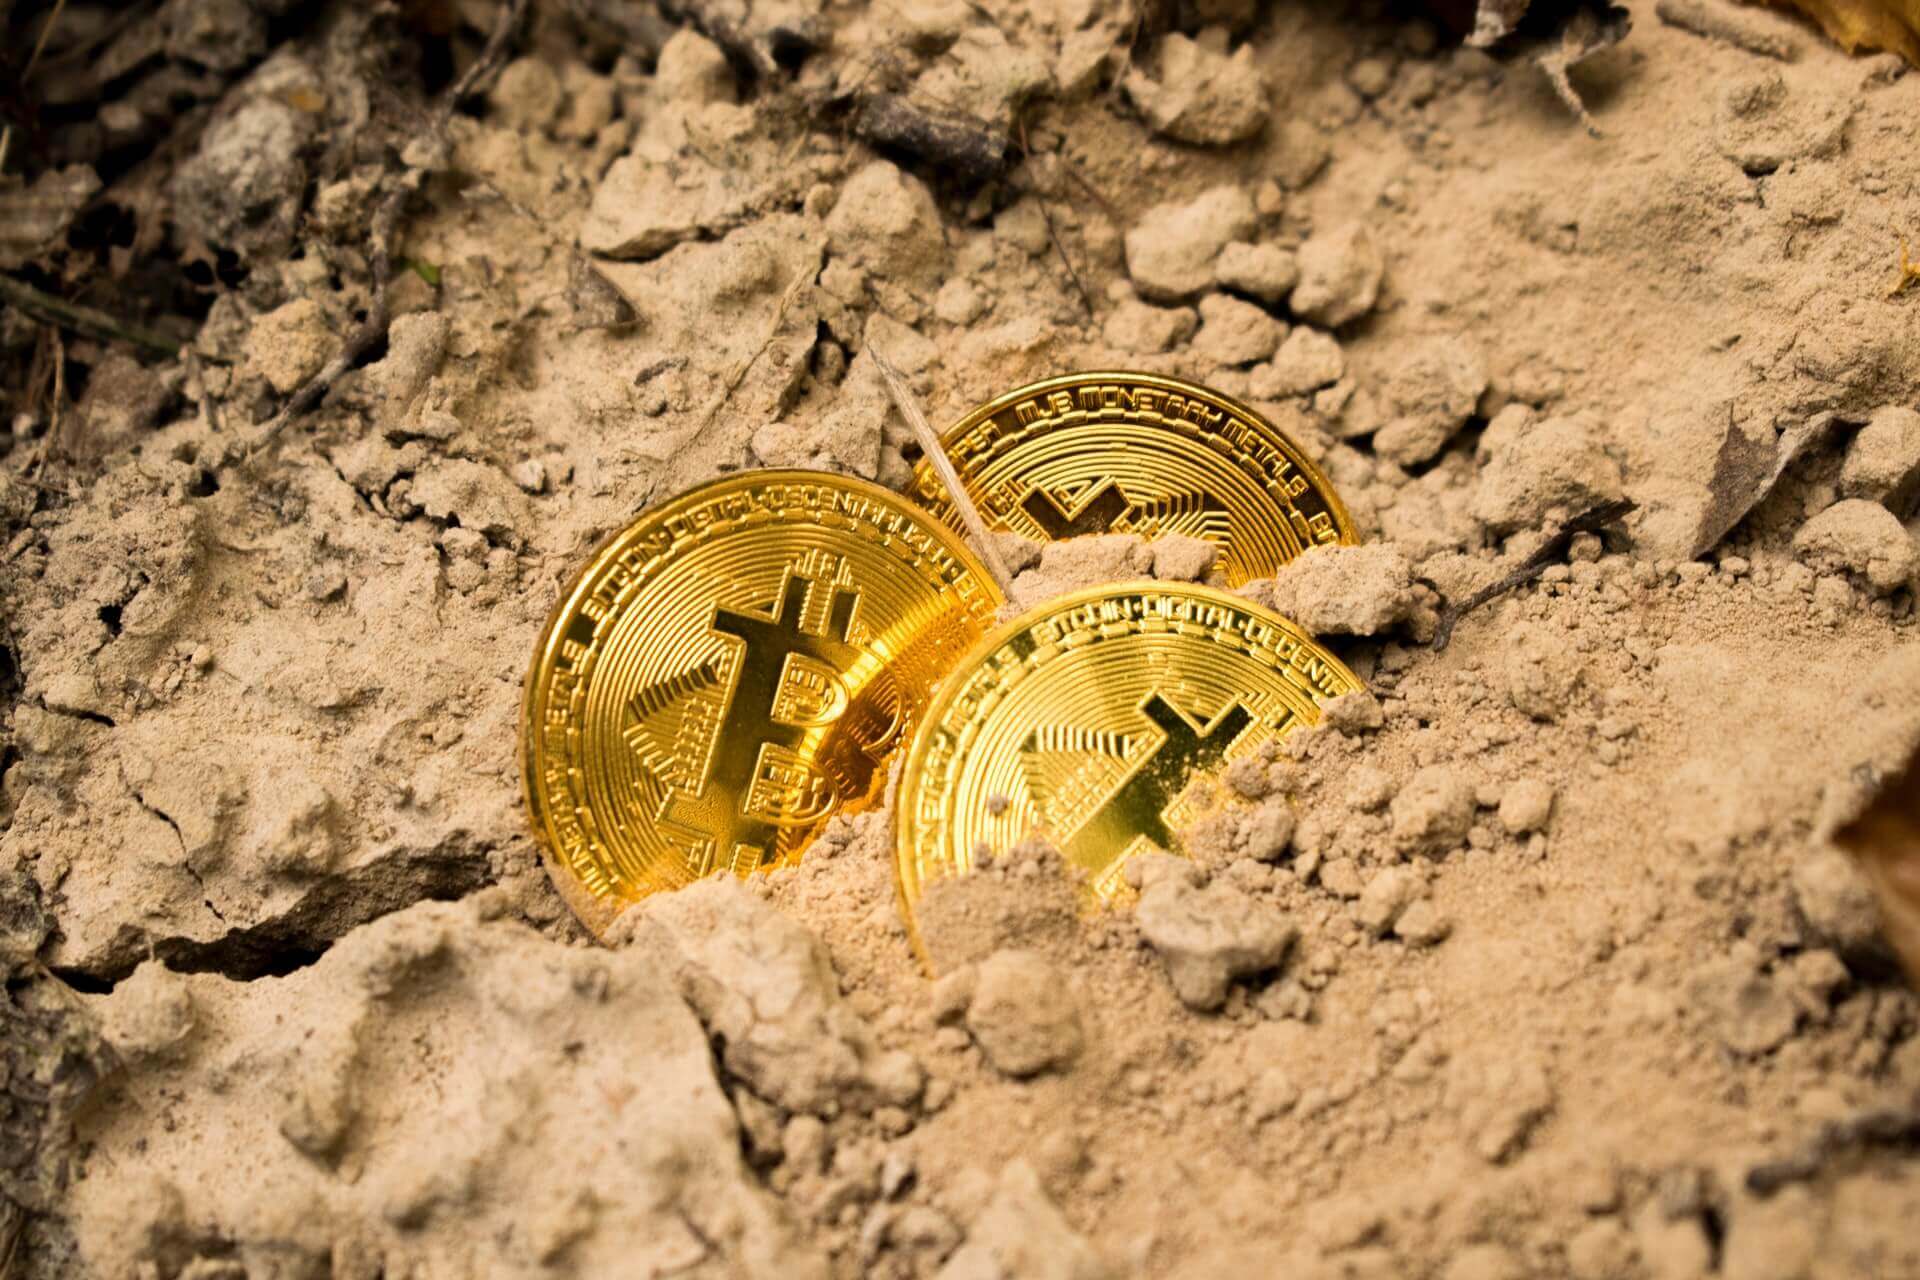 Three bitcoins partially burried in dirt to depict the legality of cryptocurrency in Nigeria.